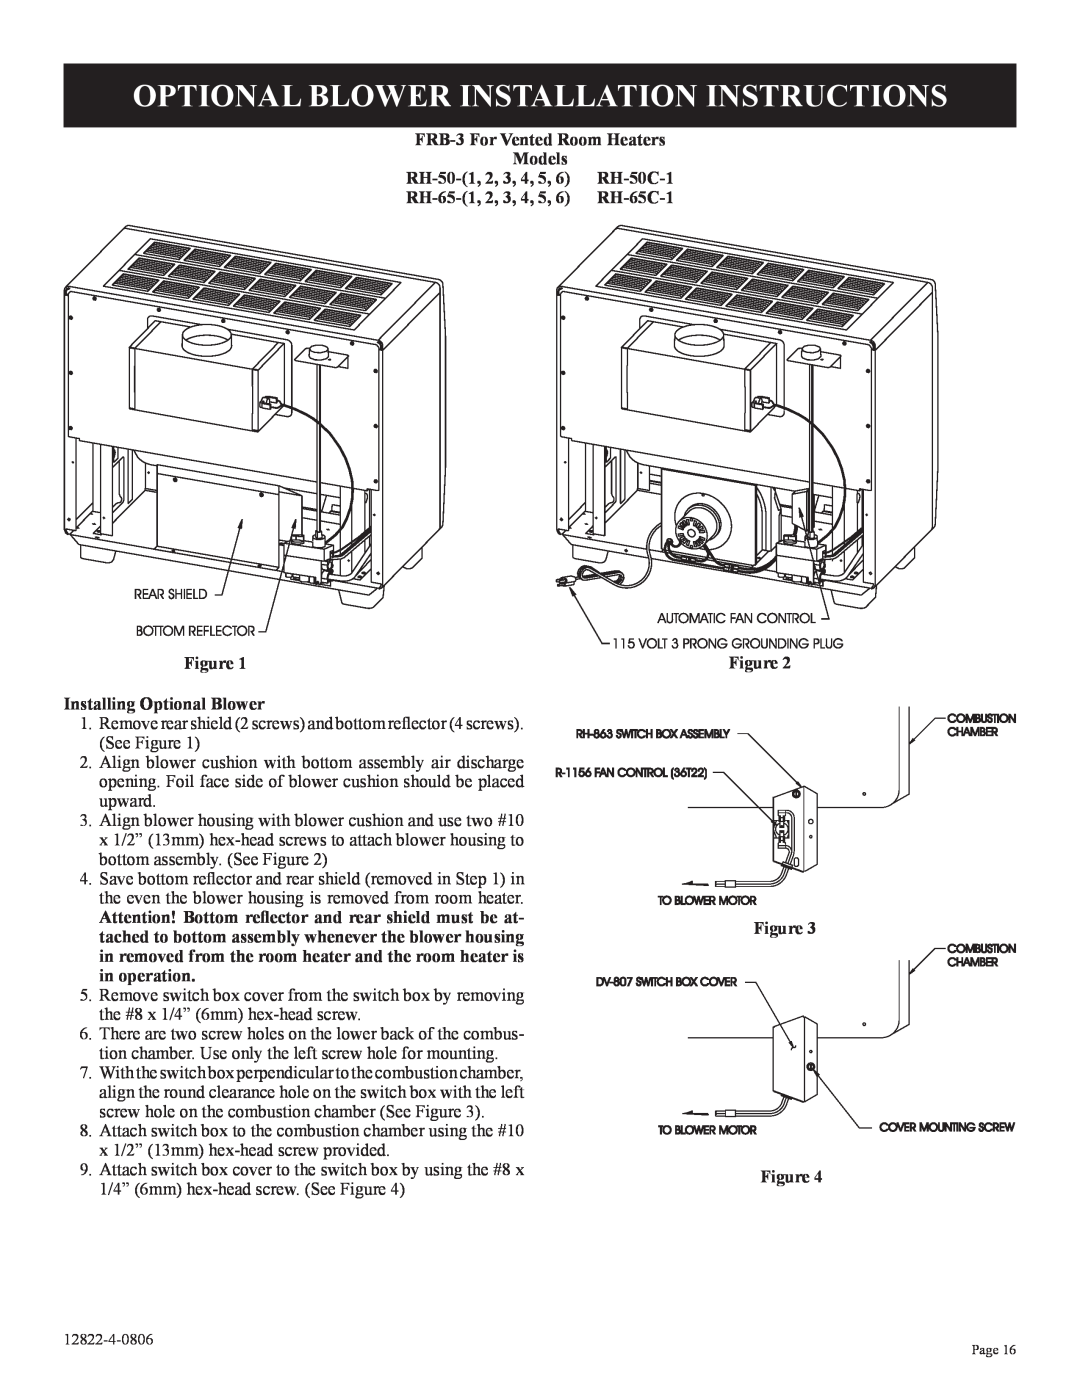 Empire Comfort Systems RH-50-6 Optional Blower Installation Instructions, FRB-3 For Vented Room Heaters, Models, RH-50C-1 